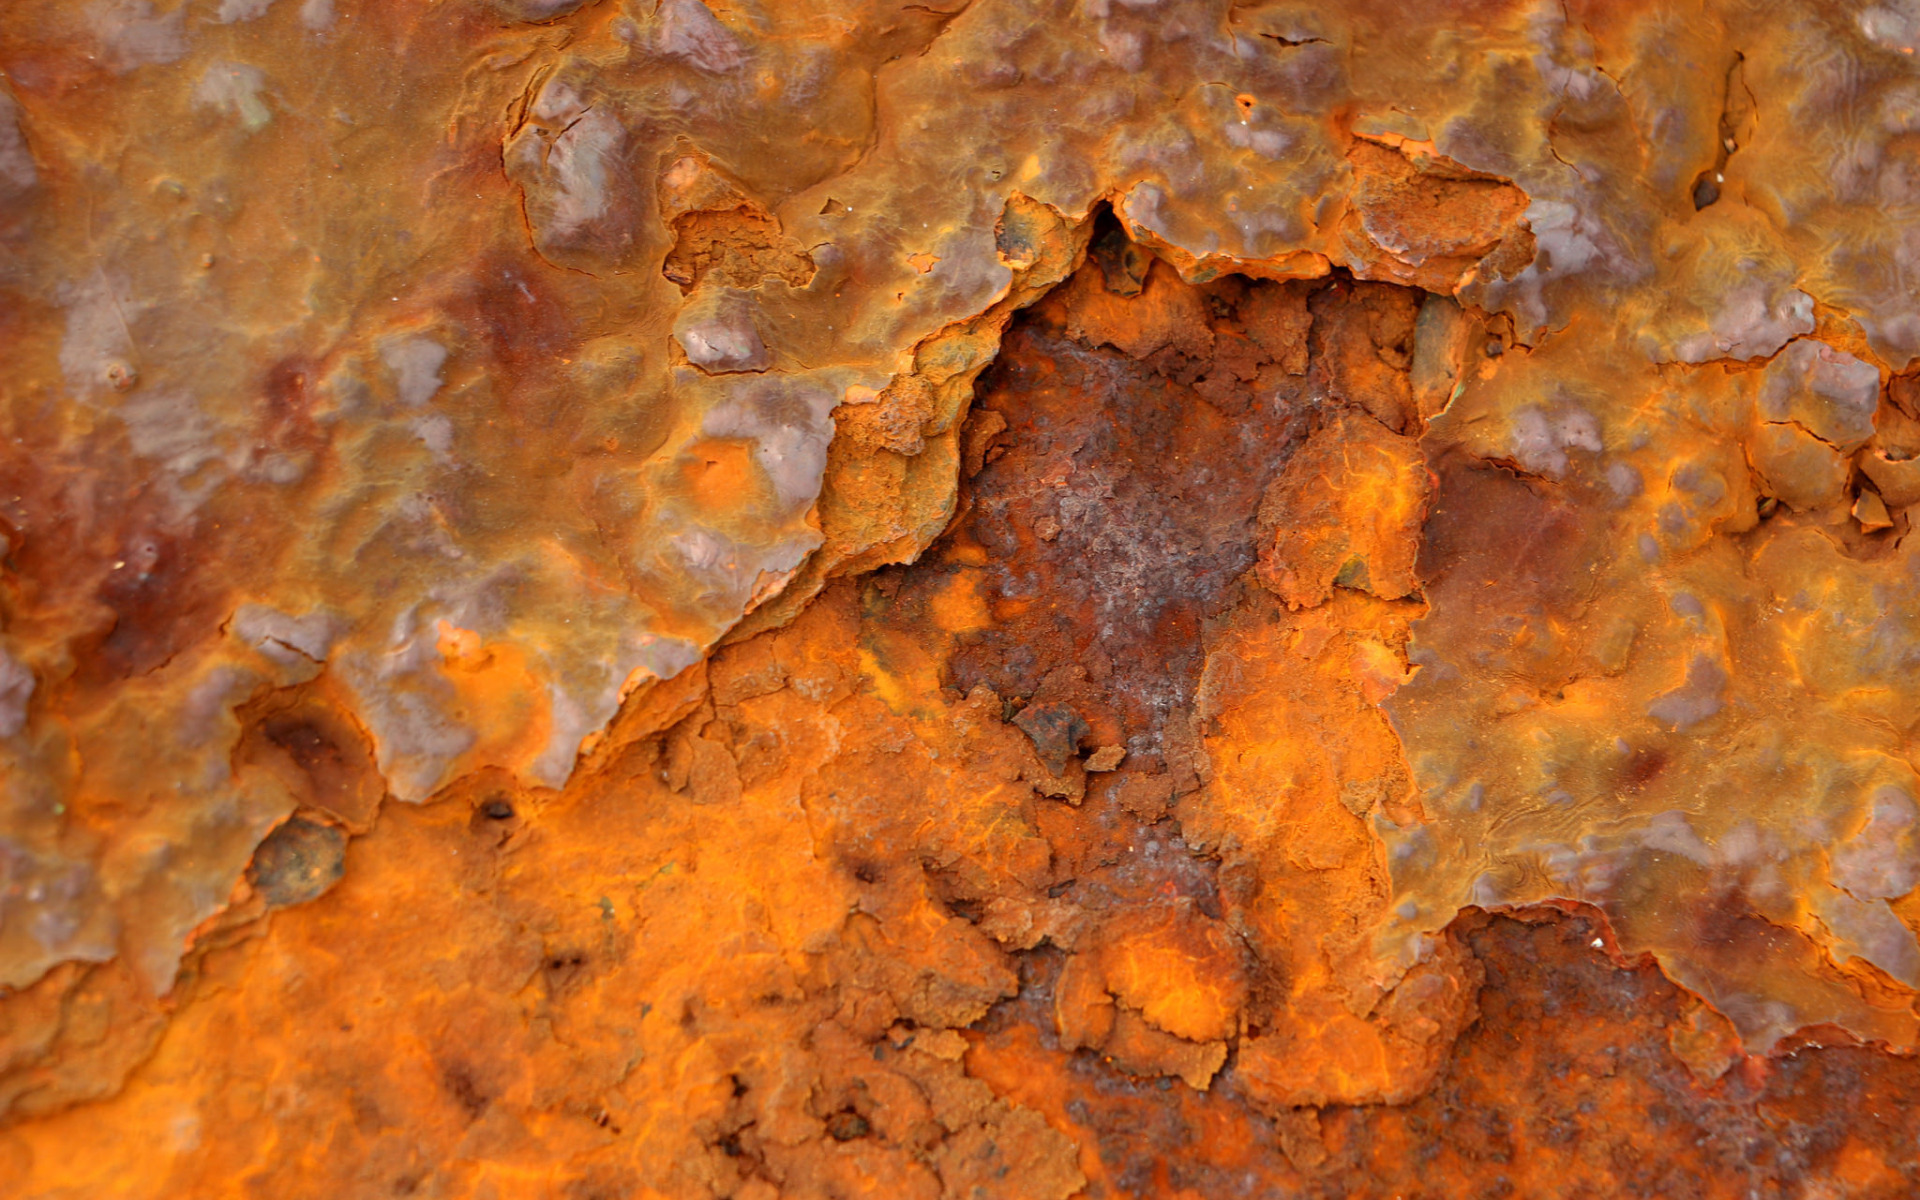 Rust with metals фото 29